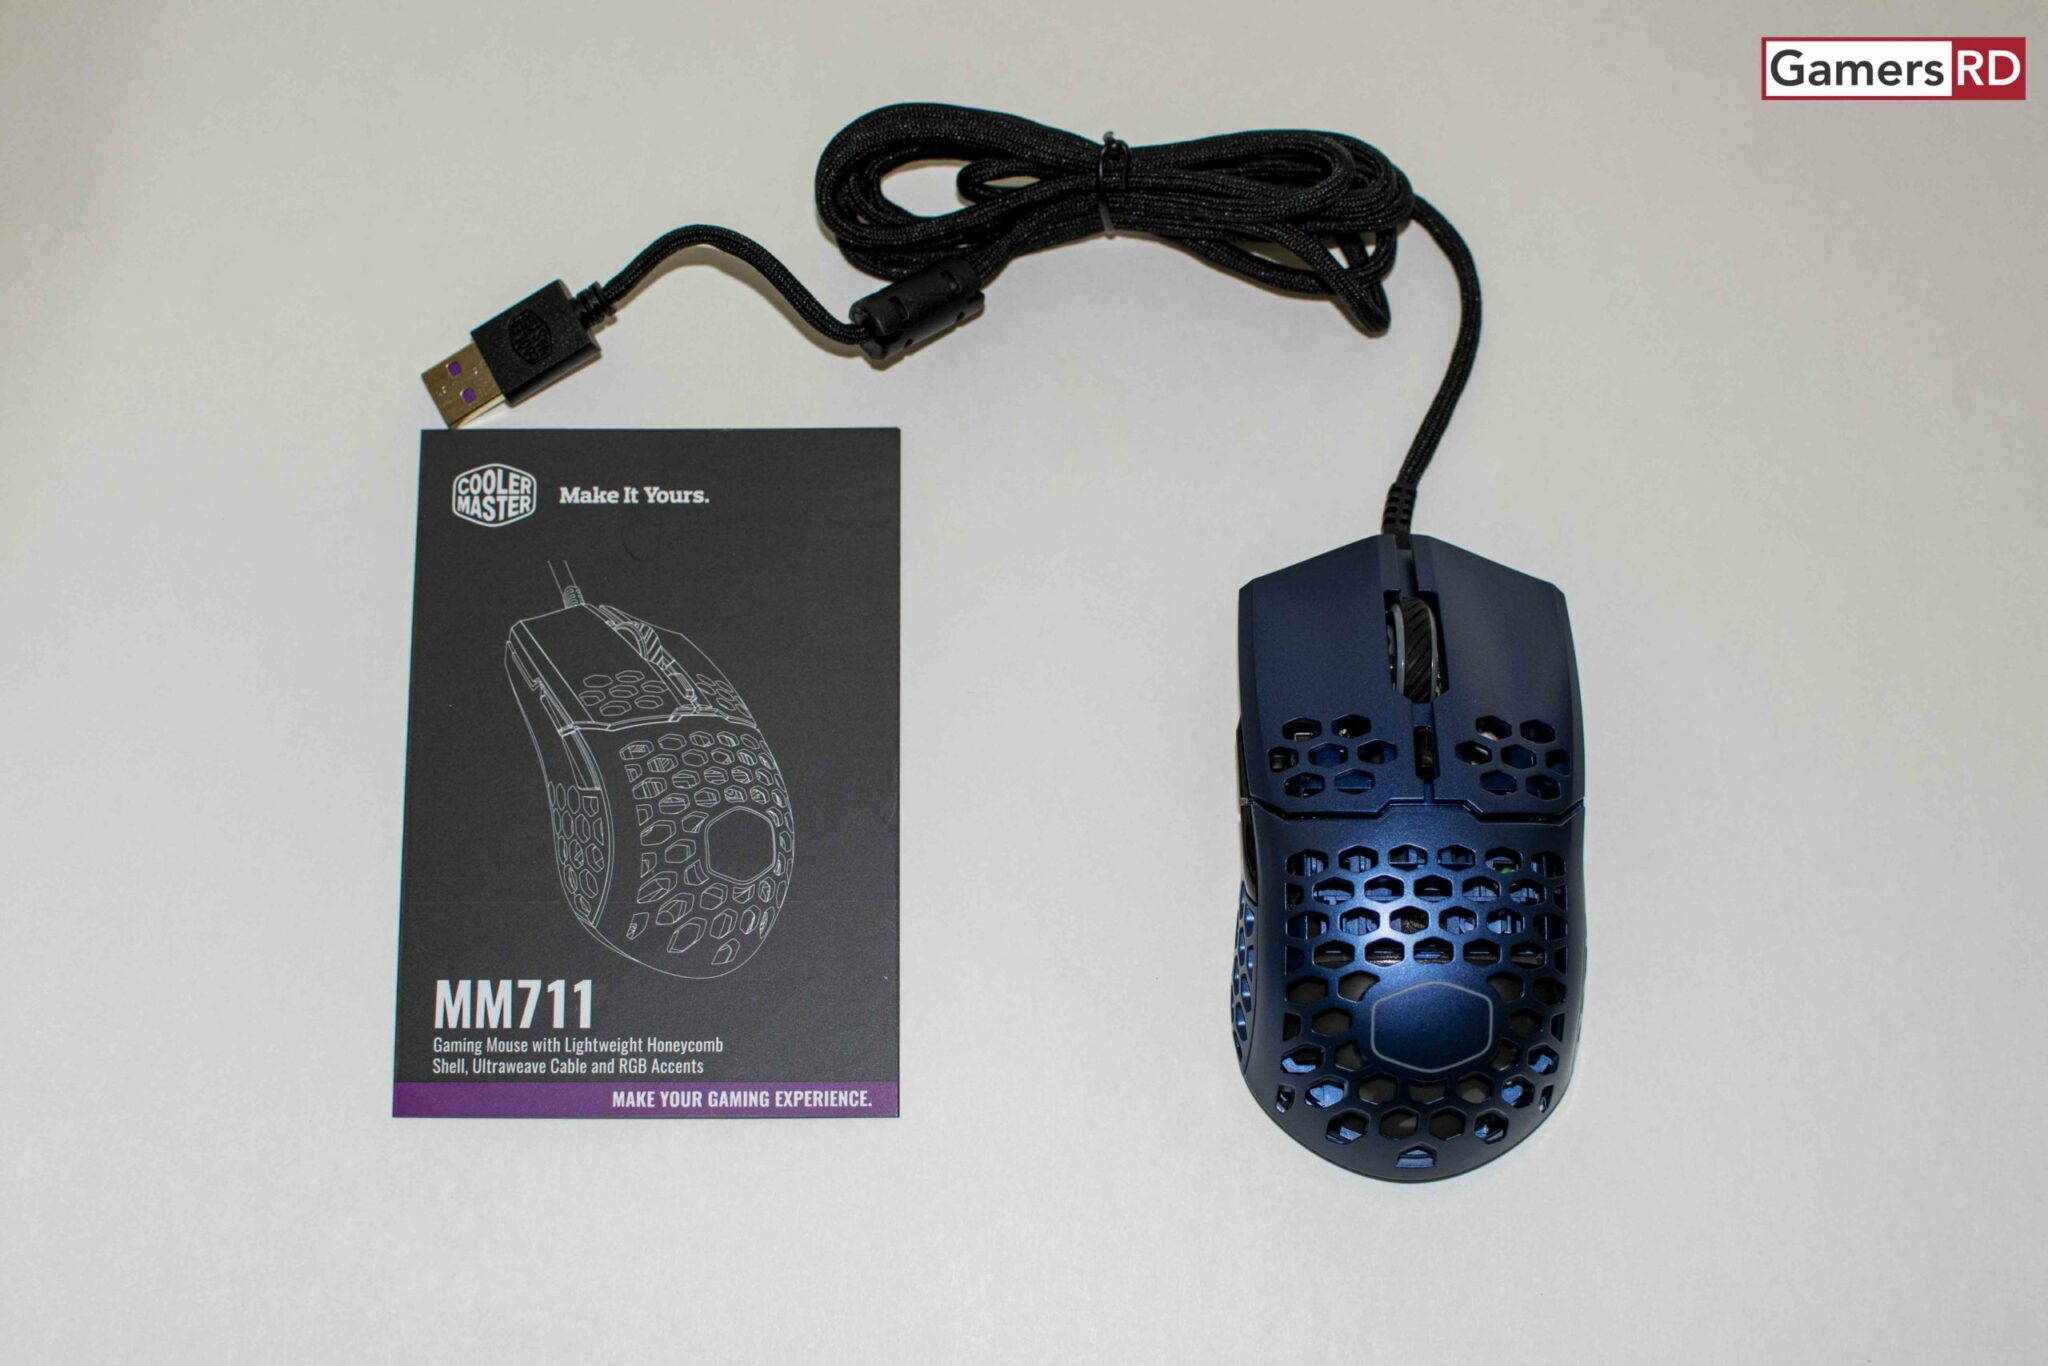 Cooler Master MM711 Gaming Mouse Review, 1 GamersRD